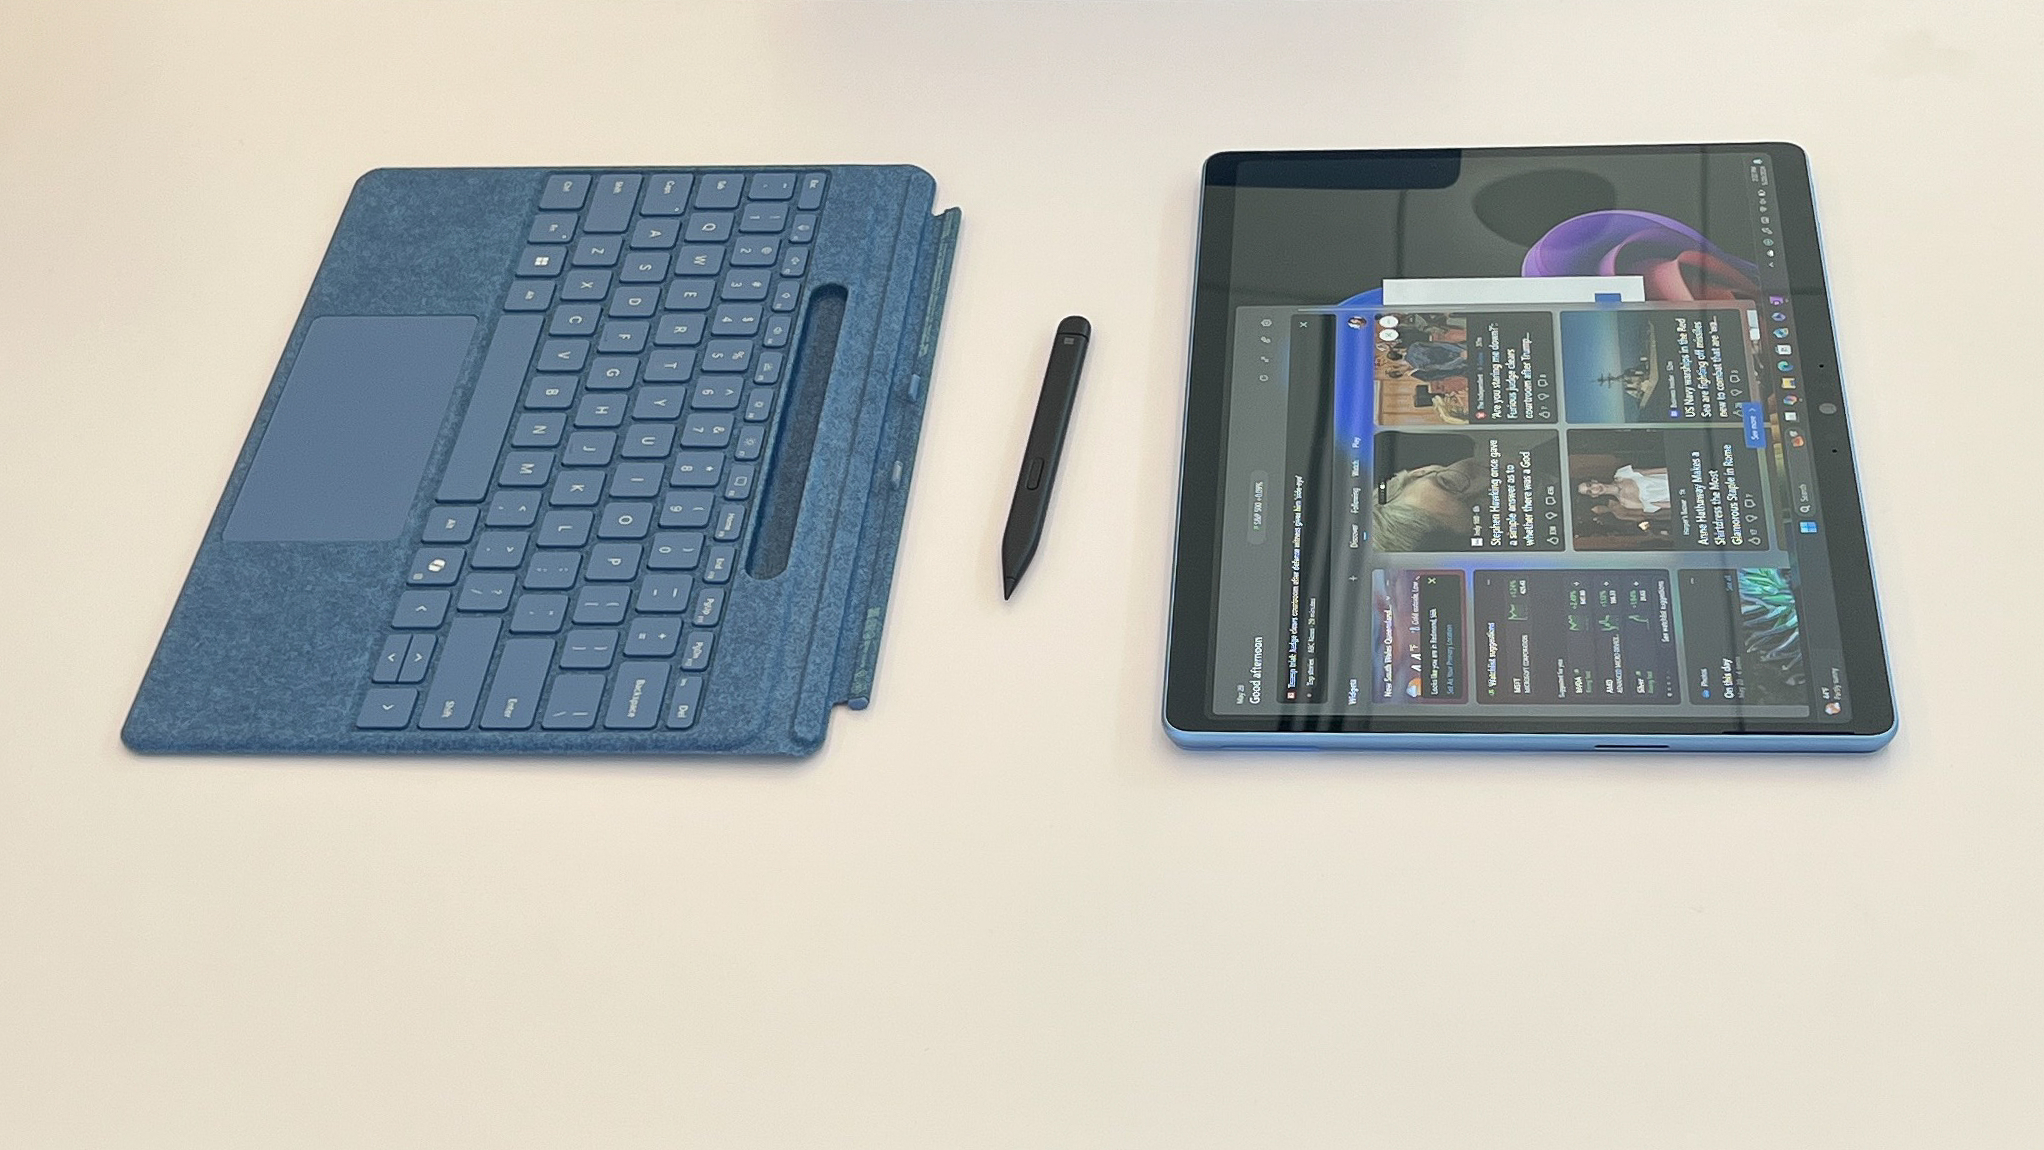 The Microsoft Surface Pro with the keyboard cover and smart pen detached